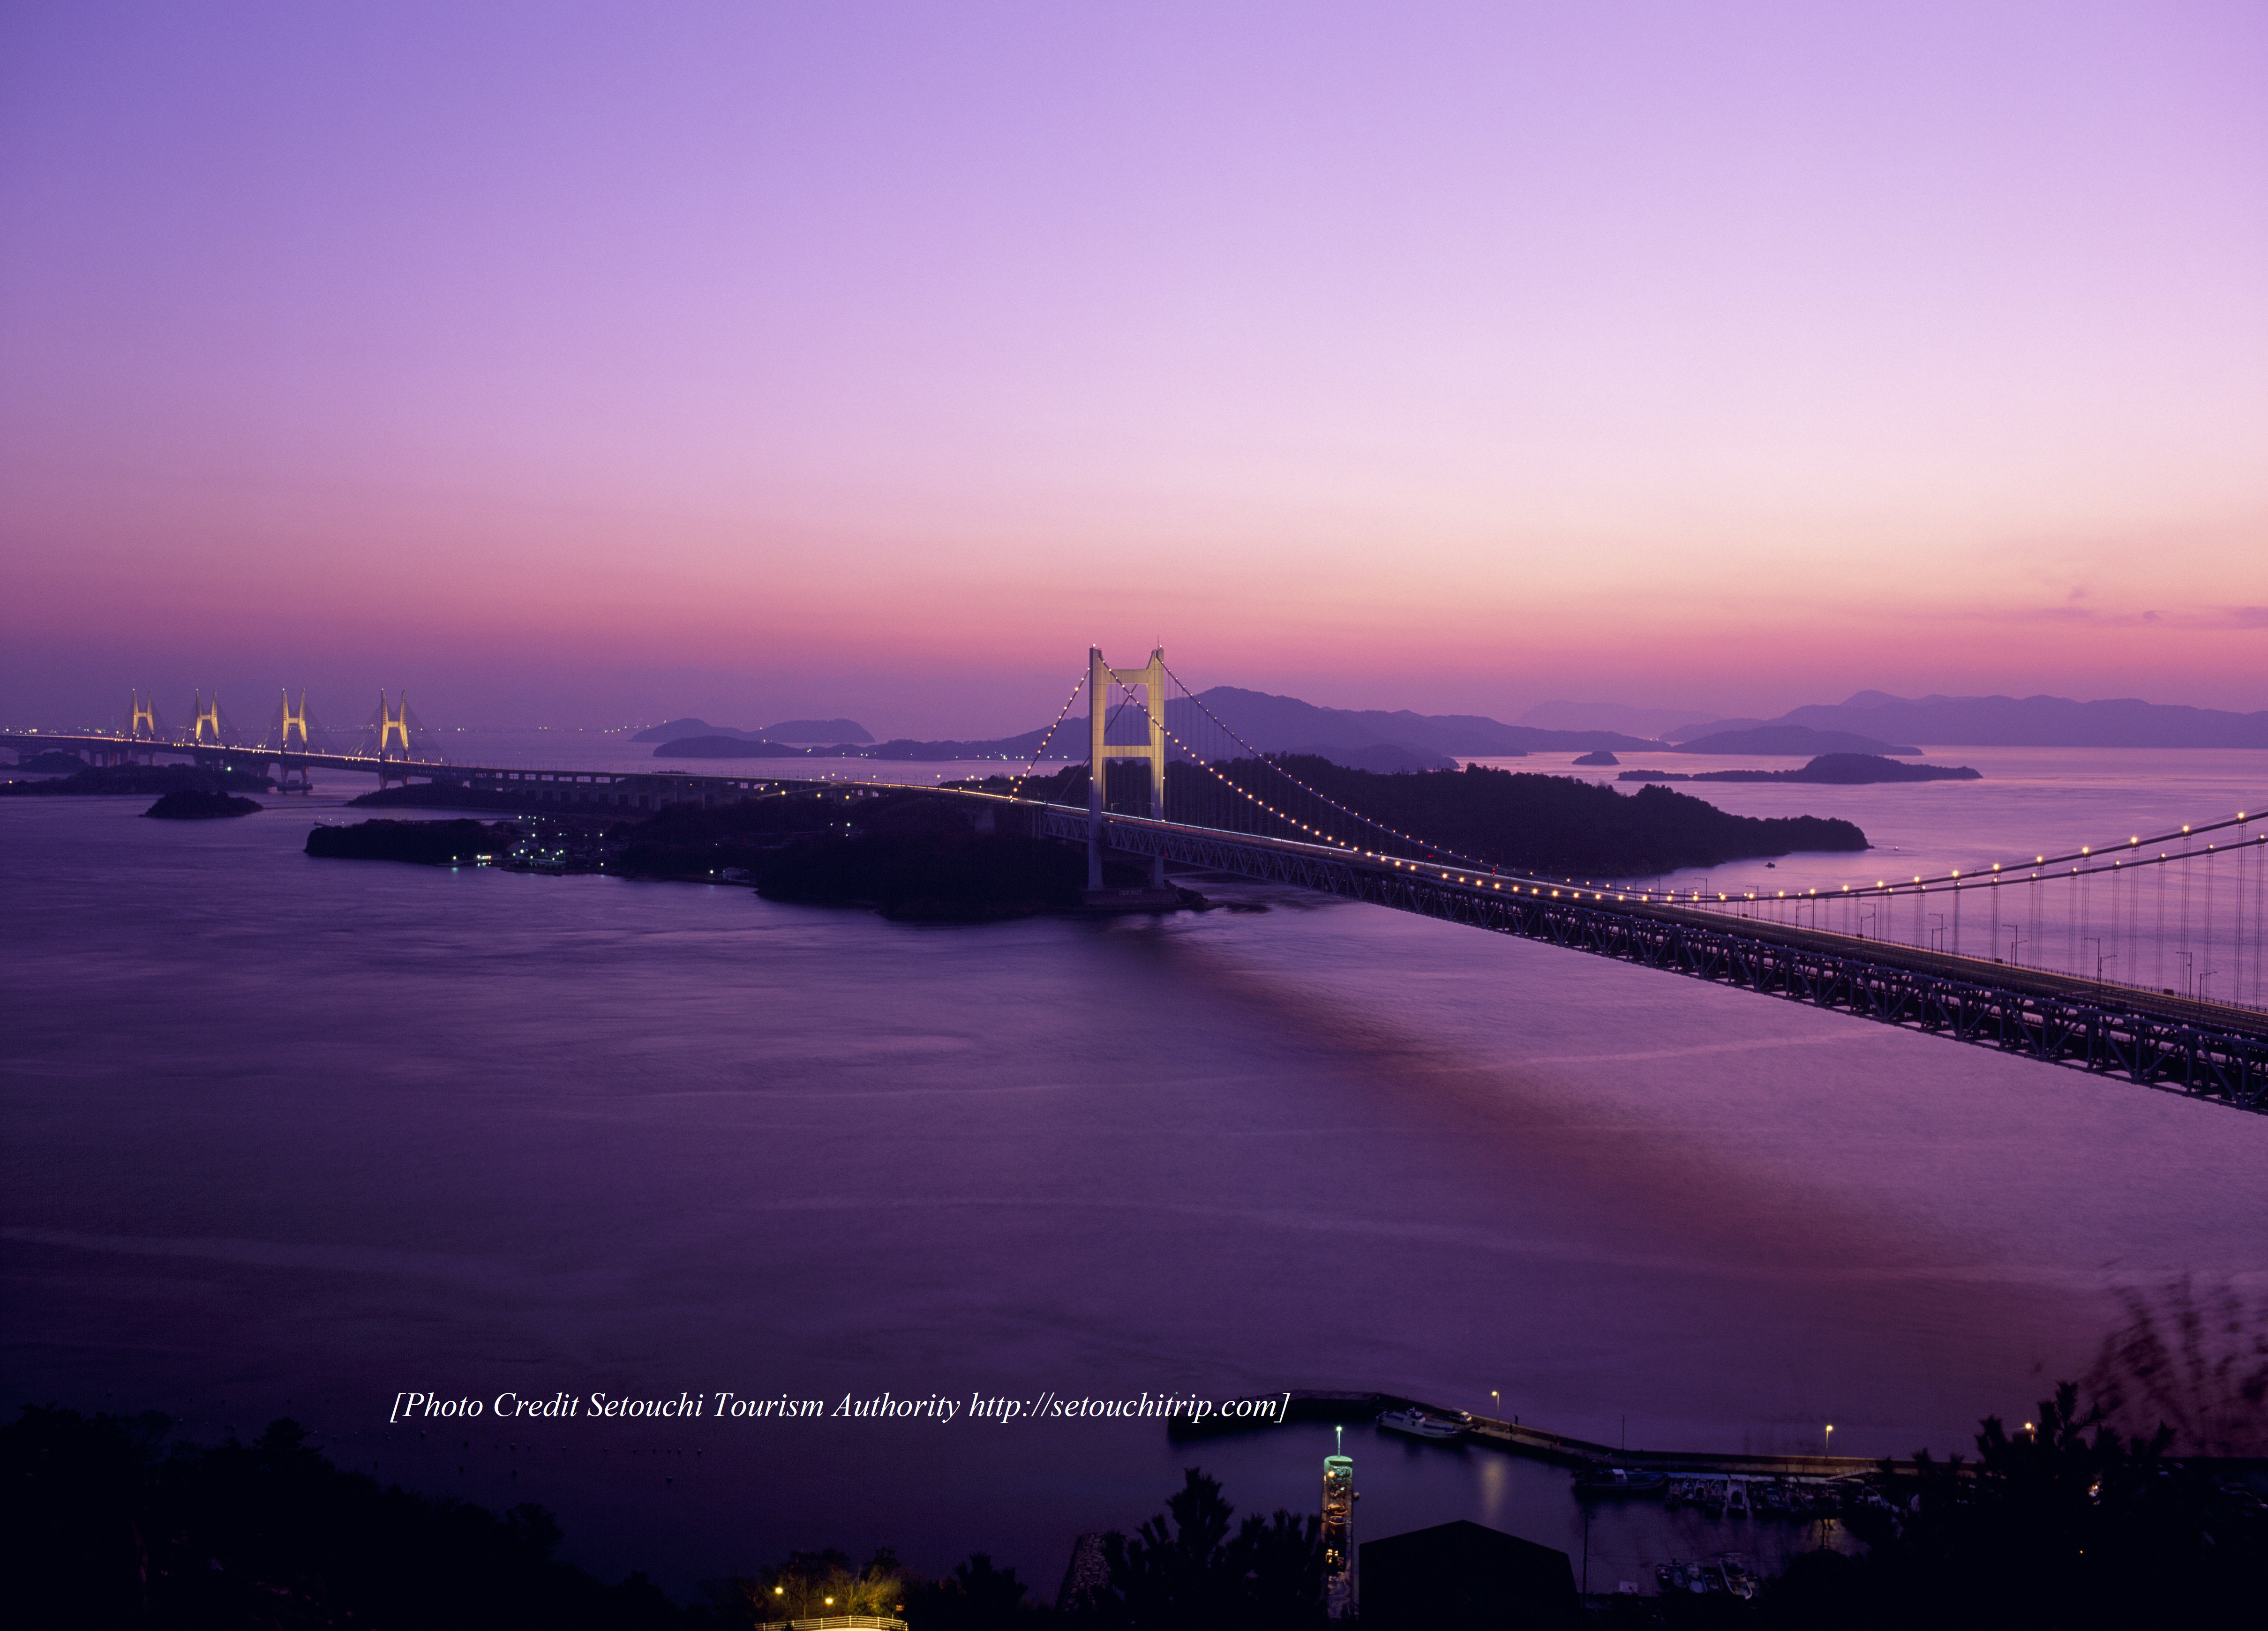 aerial view of bridge over the bay at sunset in the Setouchi region of Japan